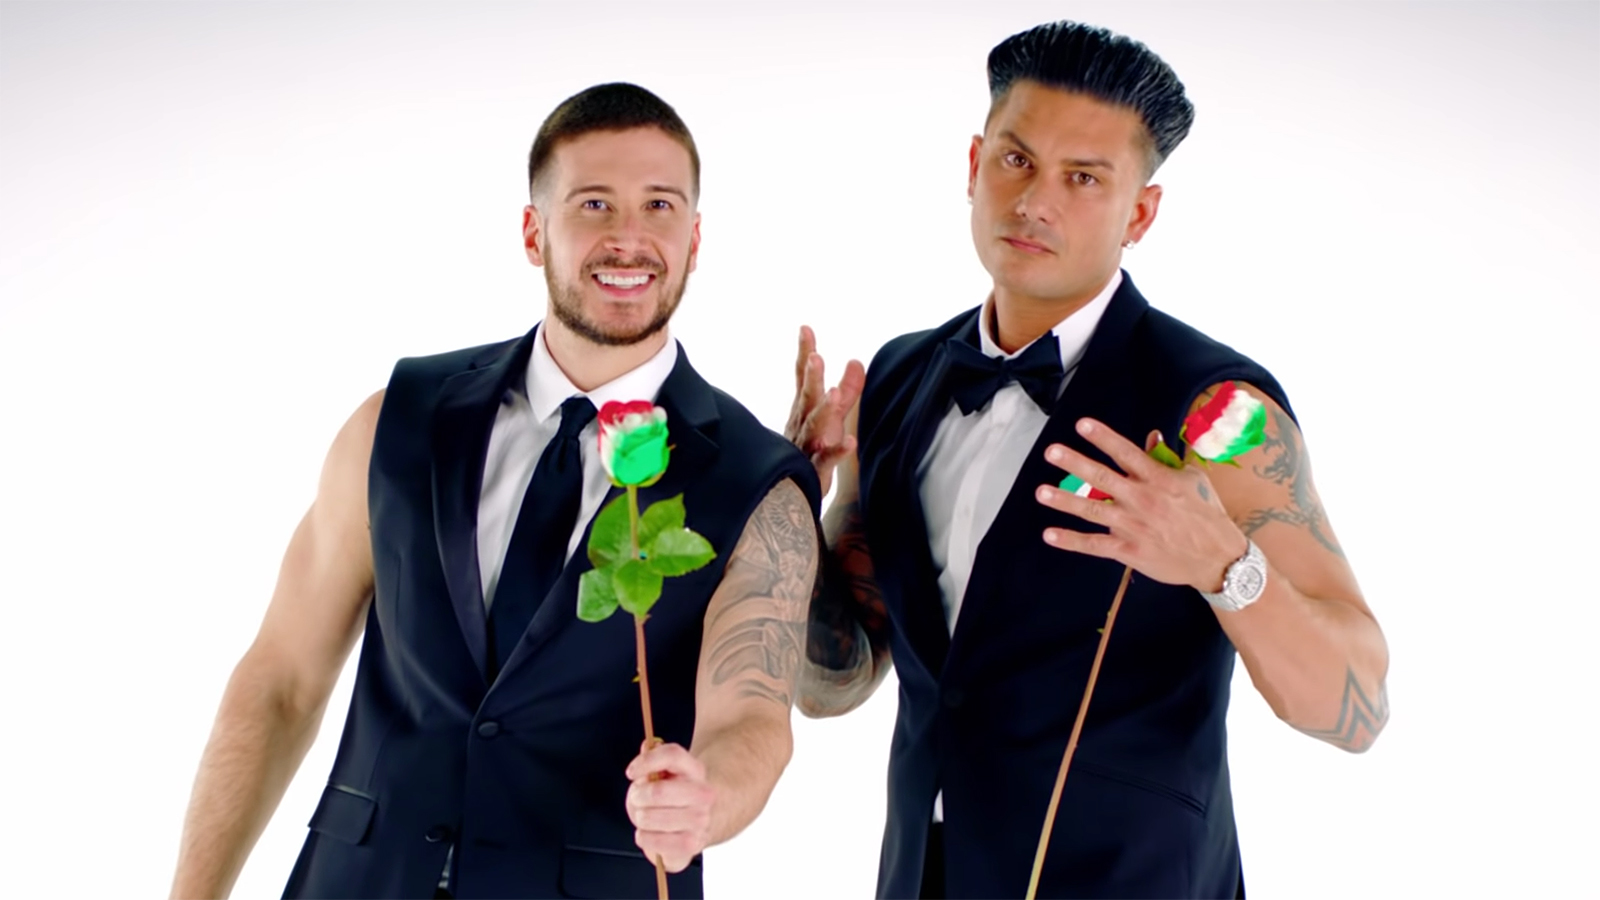 Meet the Ladies on Pauly D and Vinny's Dating Show 'Double Shot at Love'